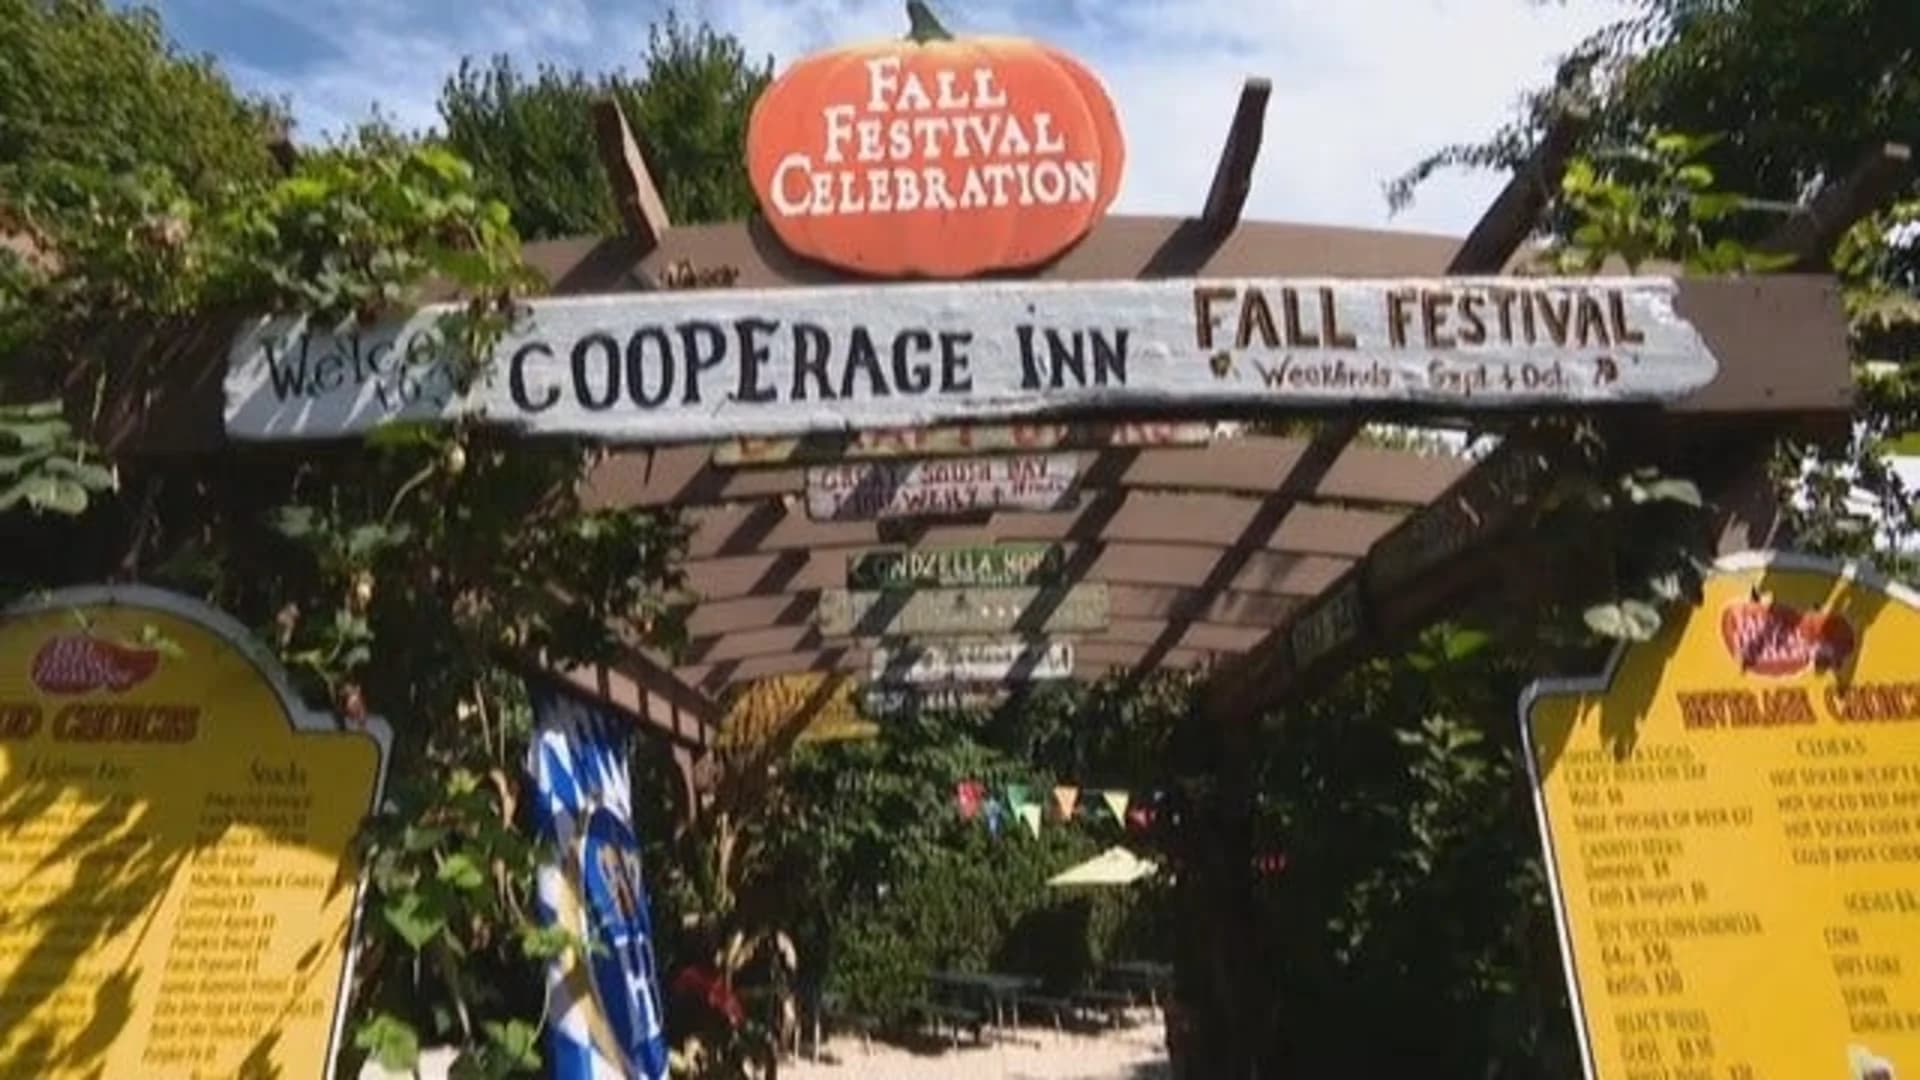 East End: Cooperage Inn in Baiting Hollow